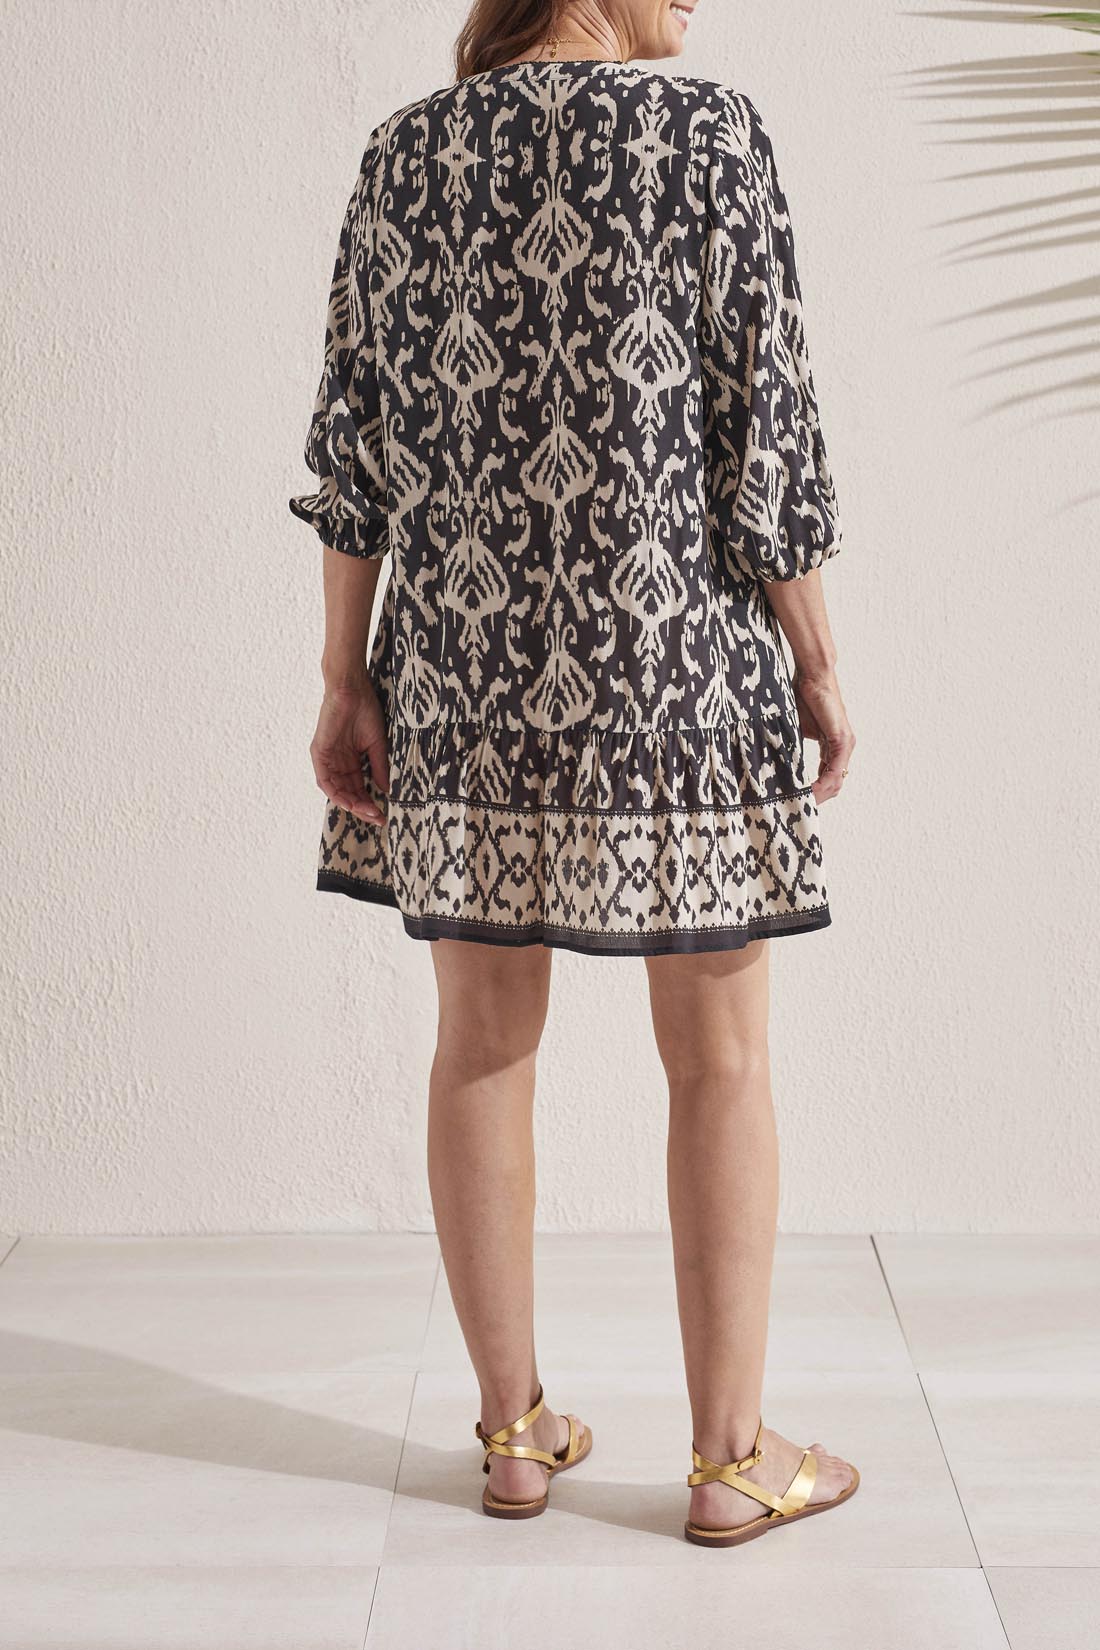 Get ready to turn heads in this Tribal 3/4 Sleeve Dress with Bottom Frill. The unique french oak pattern adds a touch of playful elegance, while the frilled bottom adds a fun twist. Perfect for any occasion, this dress effortlessly combines style and comfort.